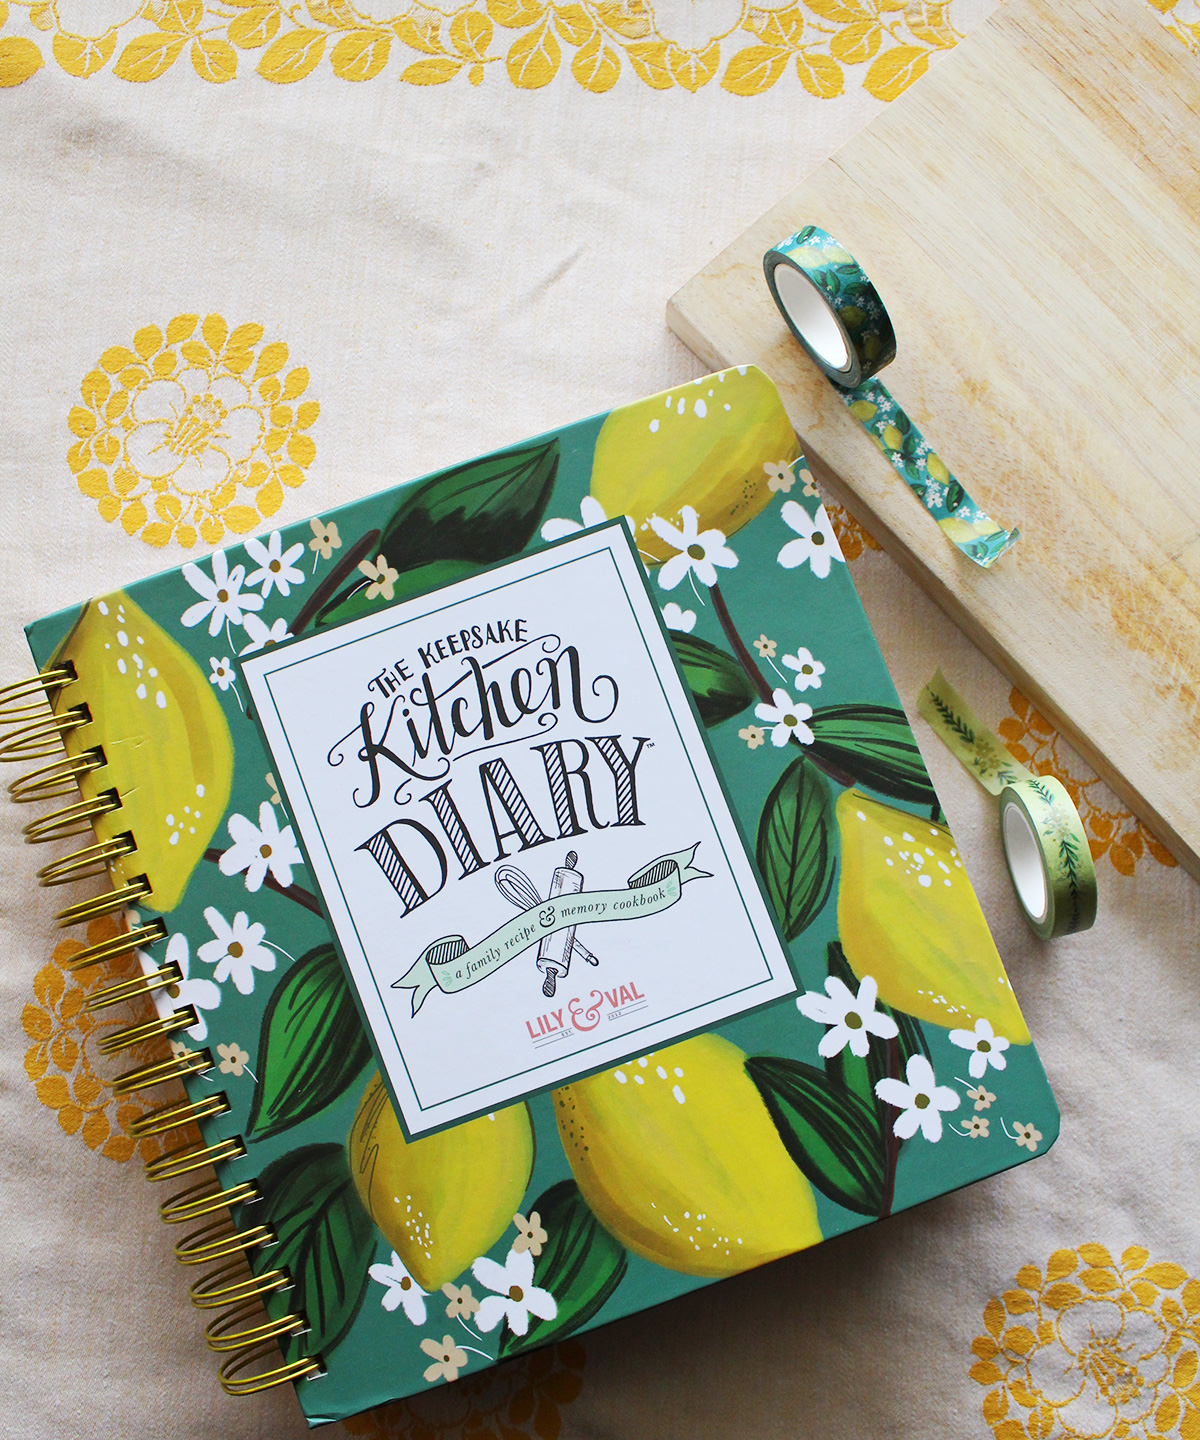 Whimsical Lemons Keepsake Kitchen Diary | Lily & Val Crafting, Scrapbooking and Planner Supplies Are Here!